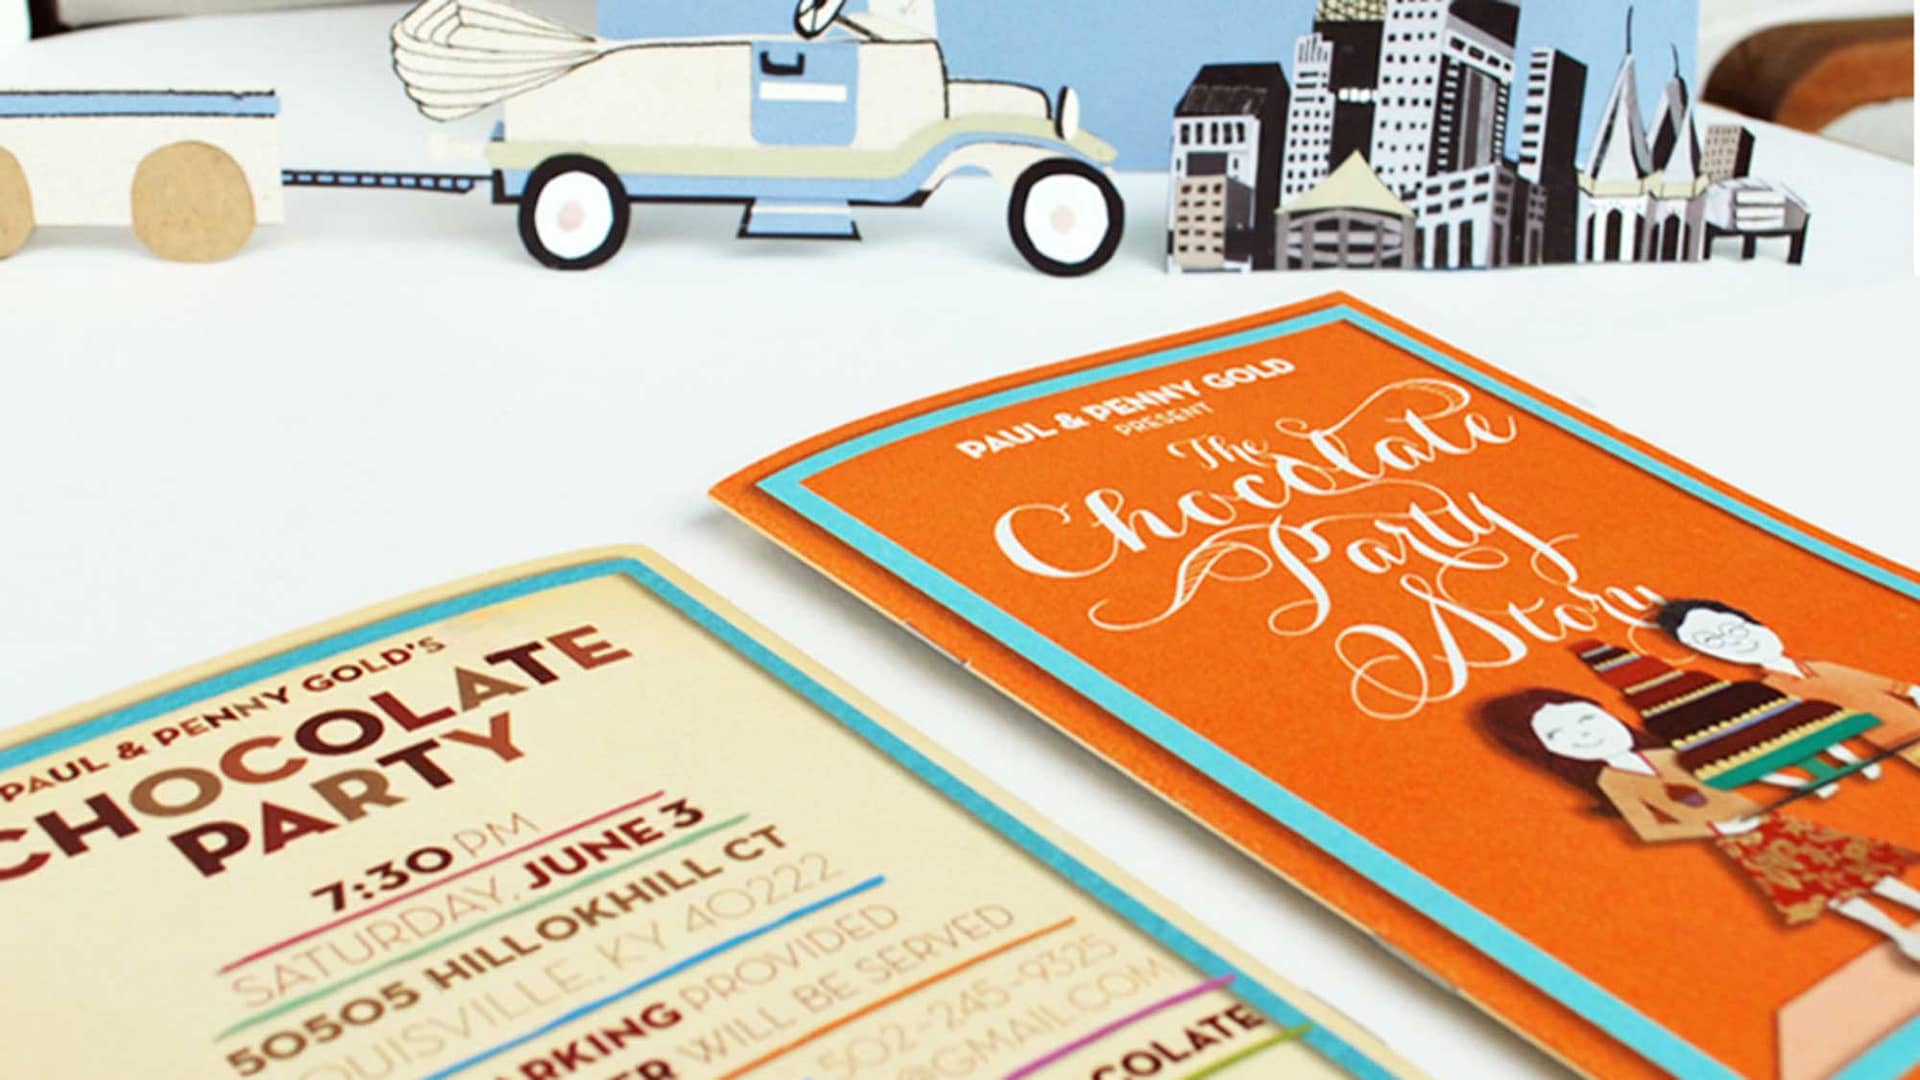 Paper Cutout Invitation in Storybook Format - Graphic Design